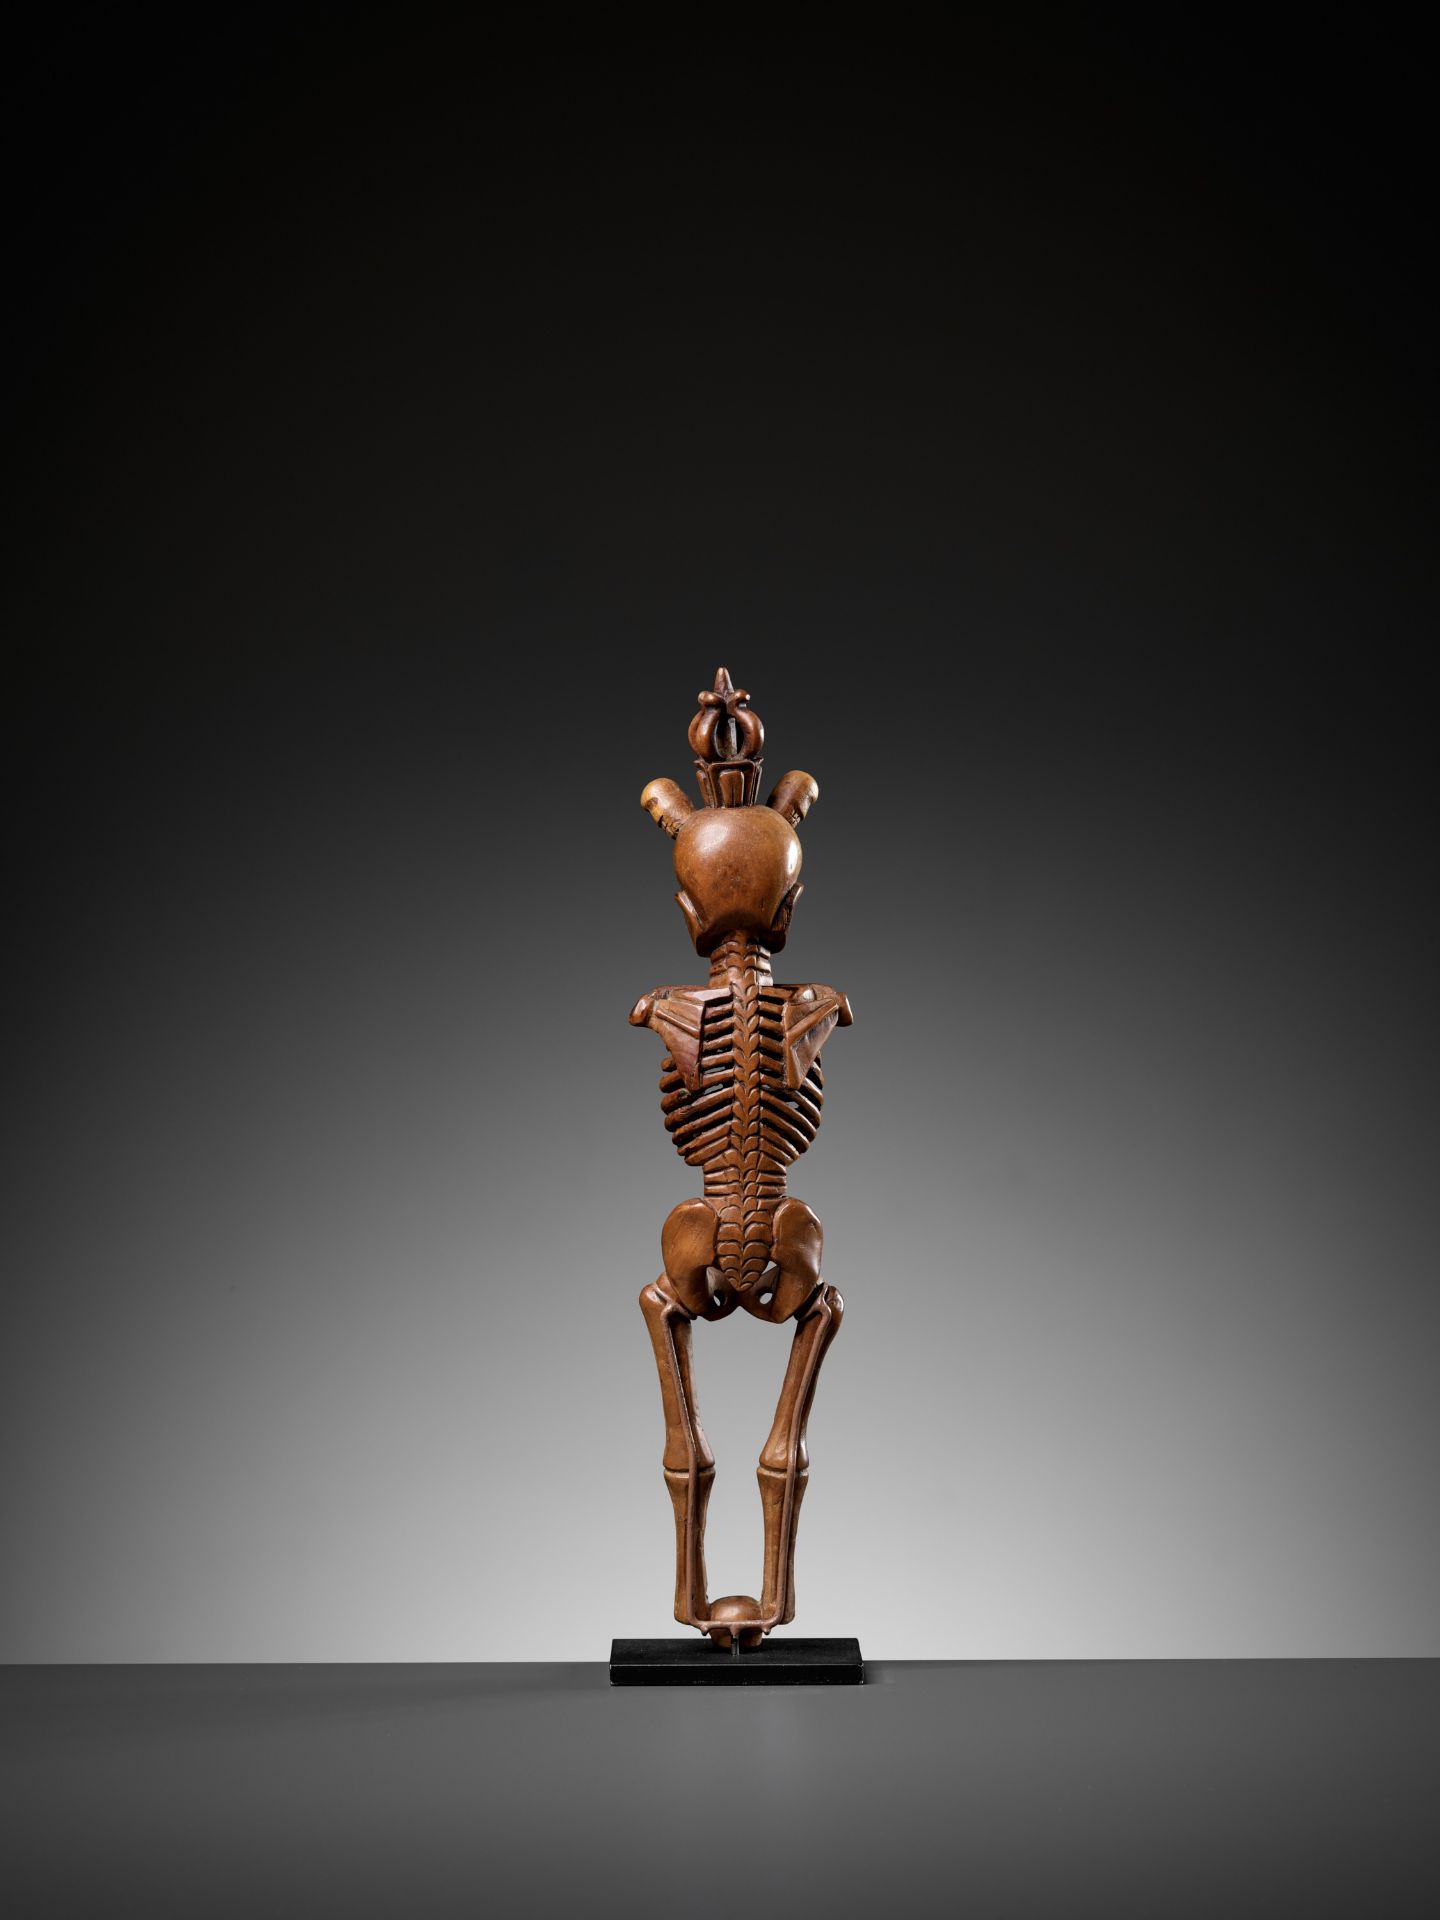 AN IMPORTANT AND RARE BAMBOO FIGURE OF A CITIPATI, 17TH-18TH CENTURY - Image 6 of 11